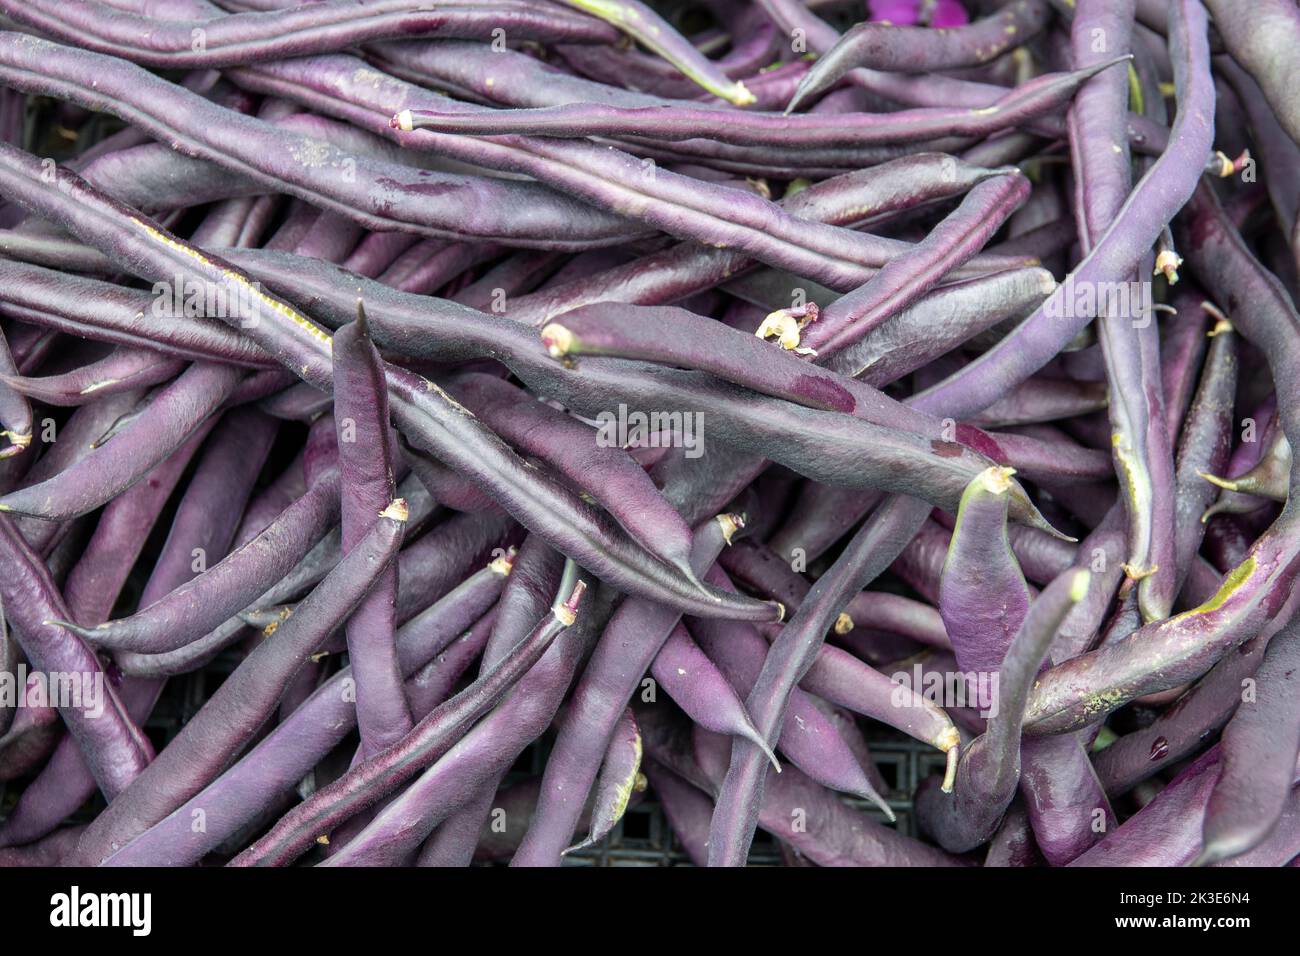 pile of fresh purple beans photographed from above Stock Photo